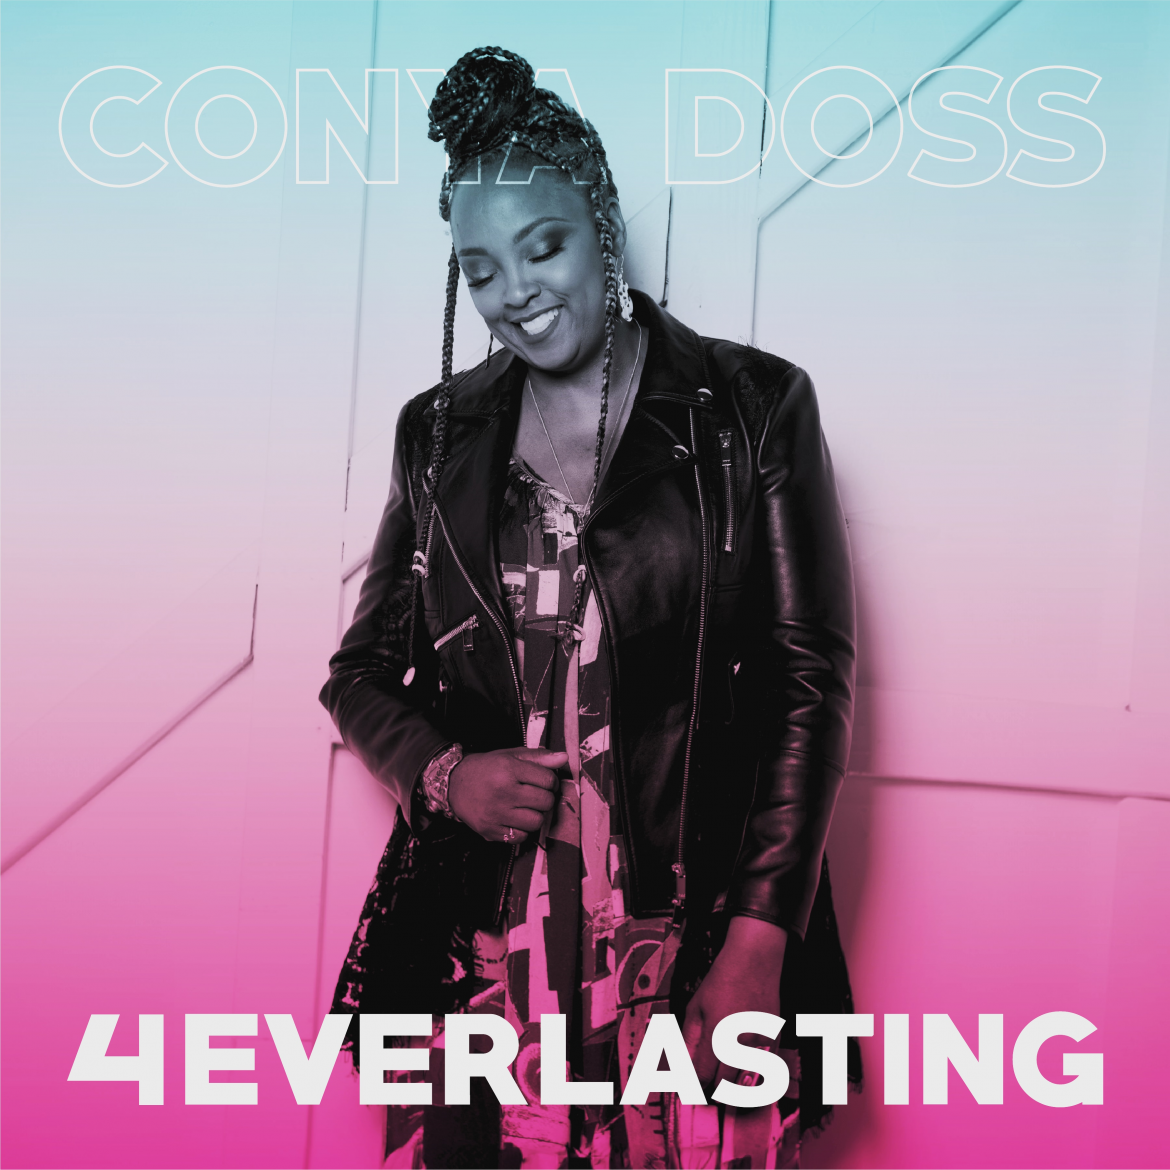 Making Waves on the Airwaves: ‘4everlasting’ featuring B. Golden Takes the Radio Charts by Storm